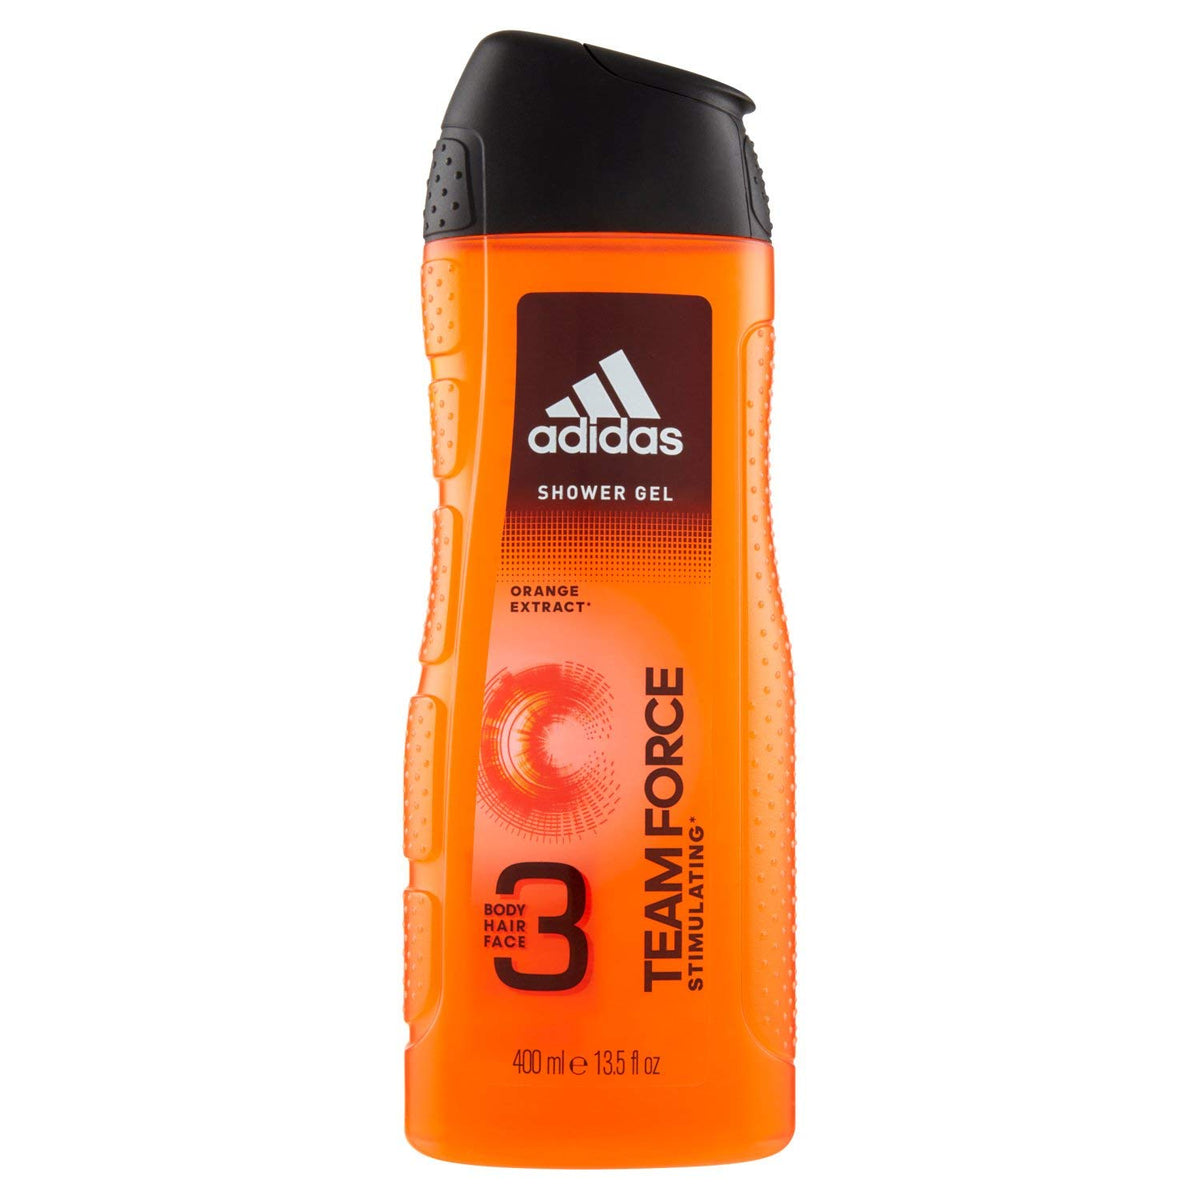 Adidas Team Force 3in1 Body, Hair And Face Shower Gel -400ml